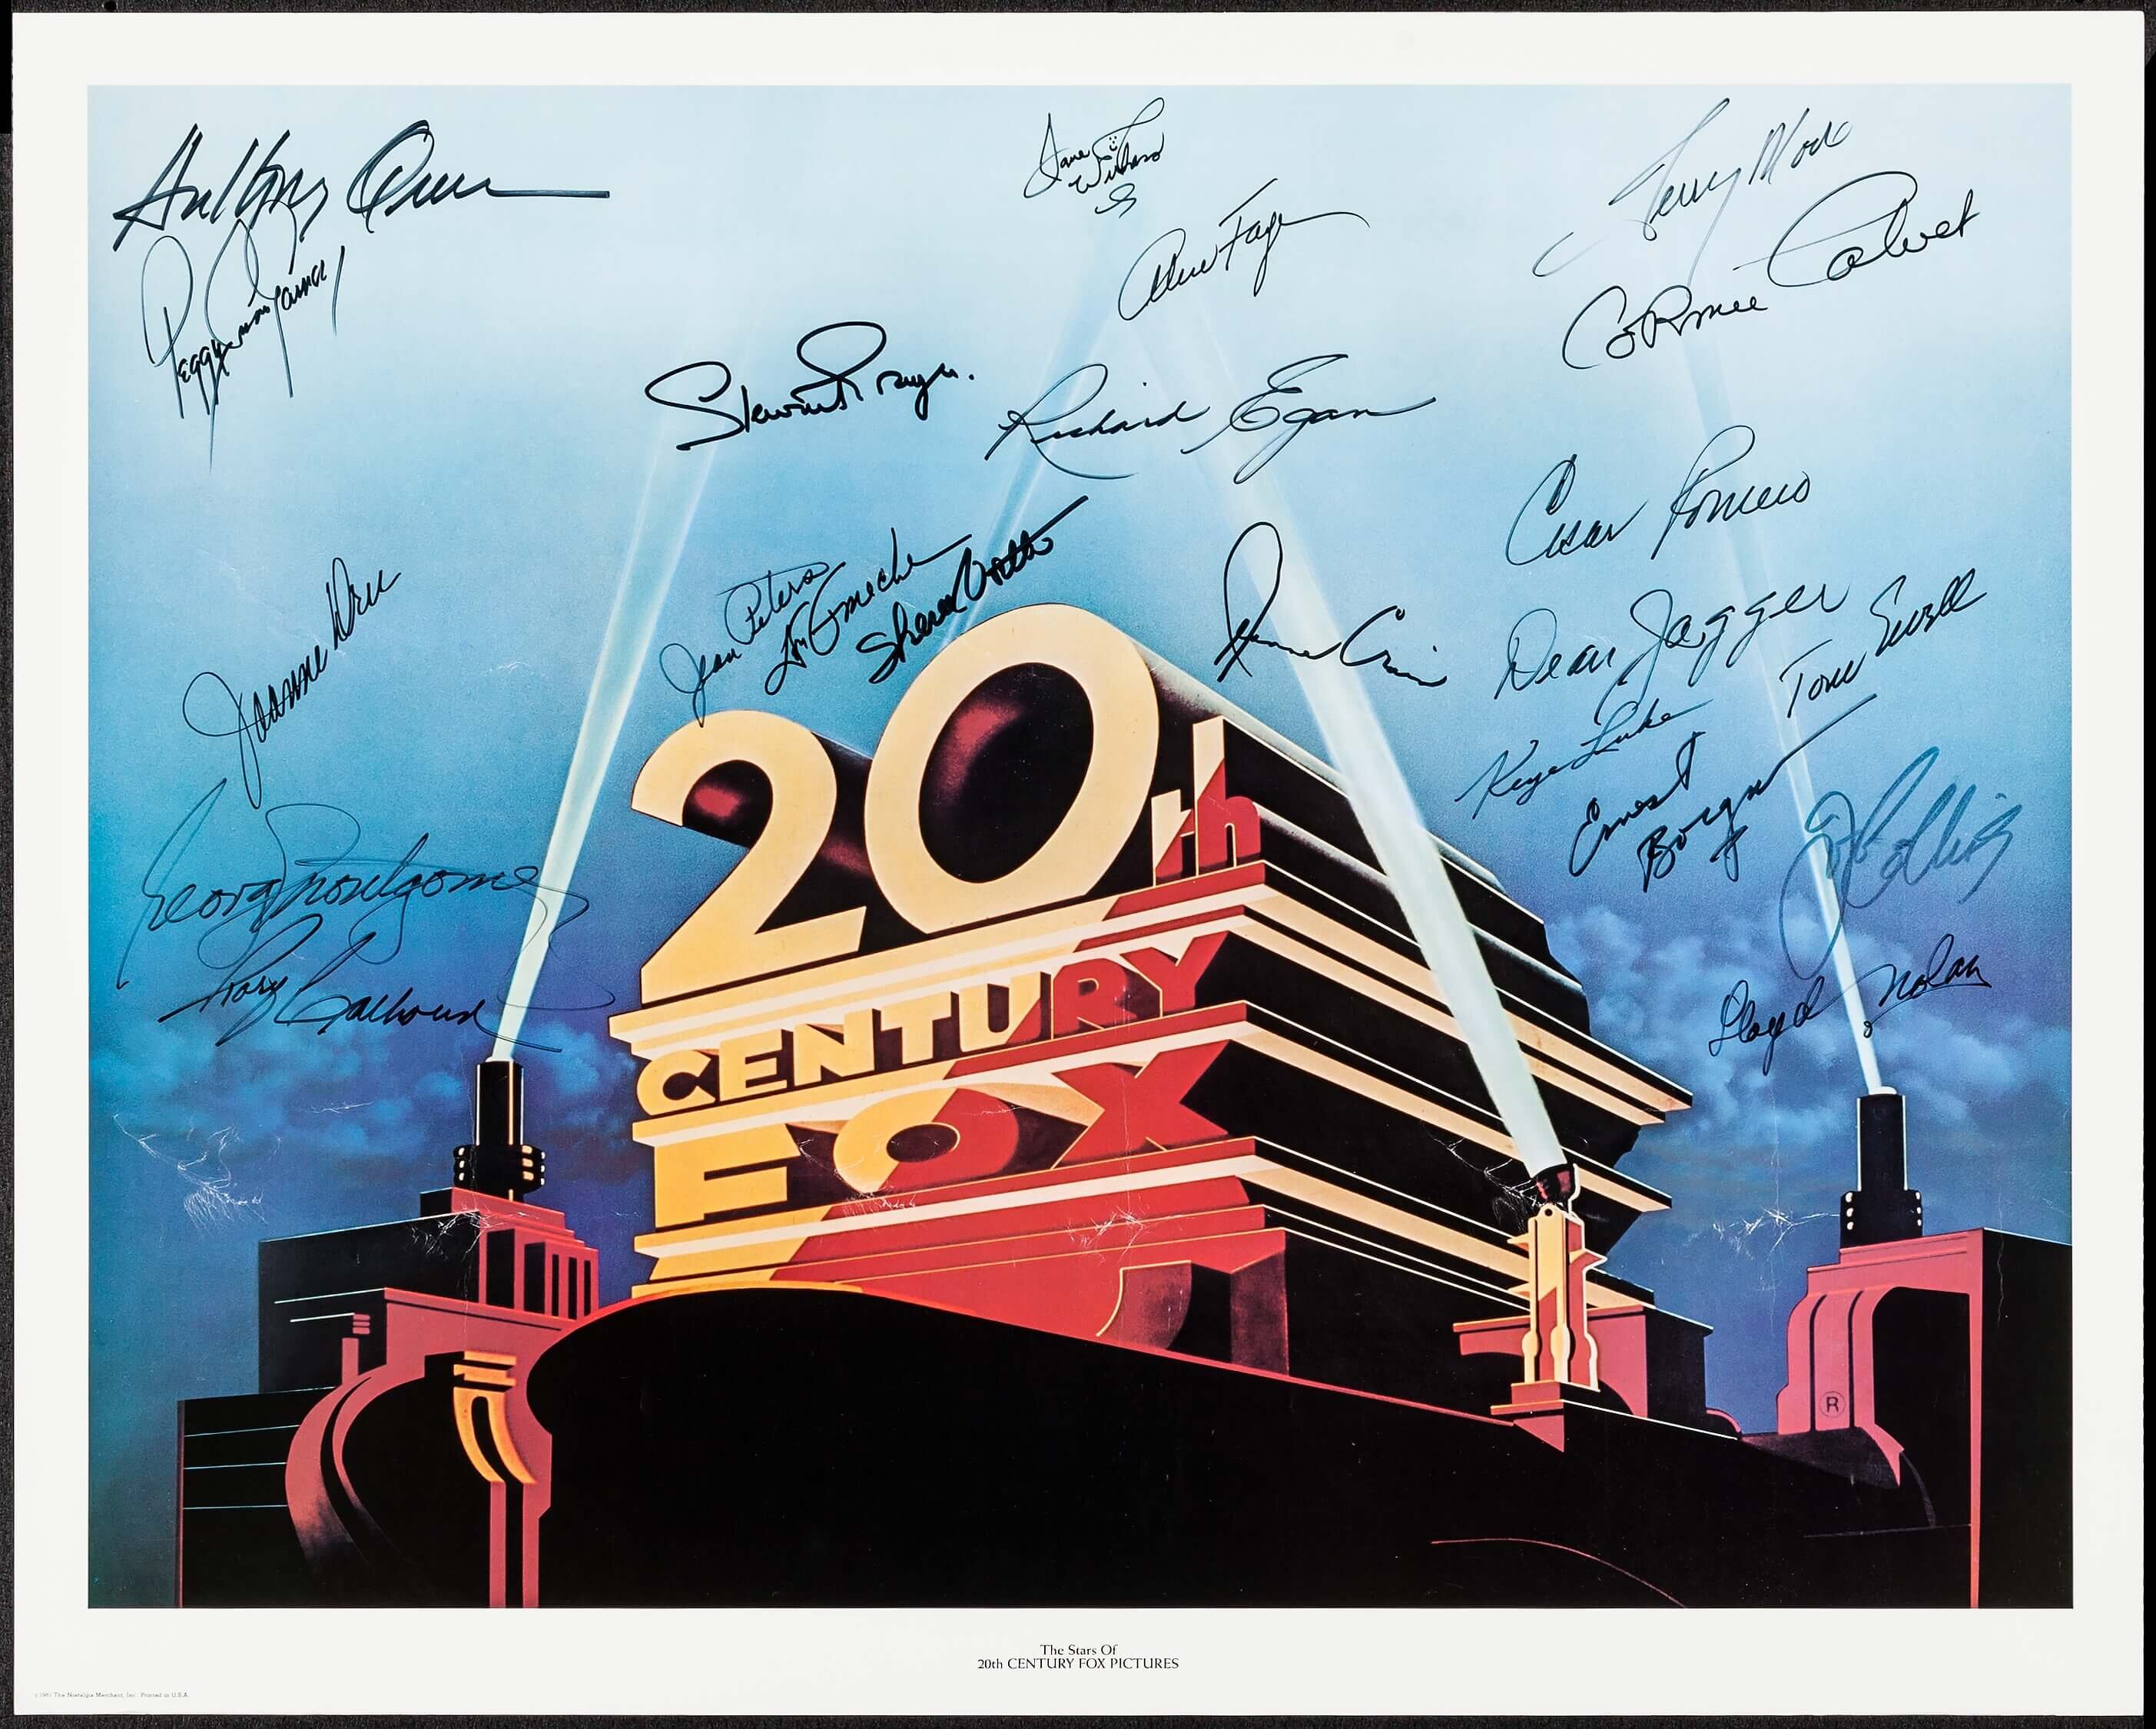 20th Century Fox Posters for Sale